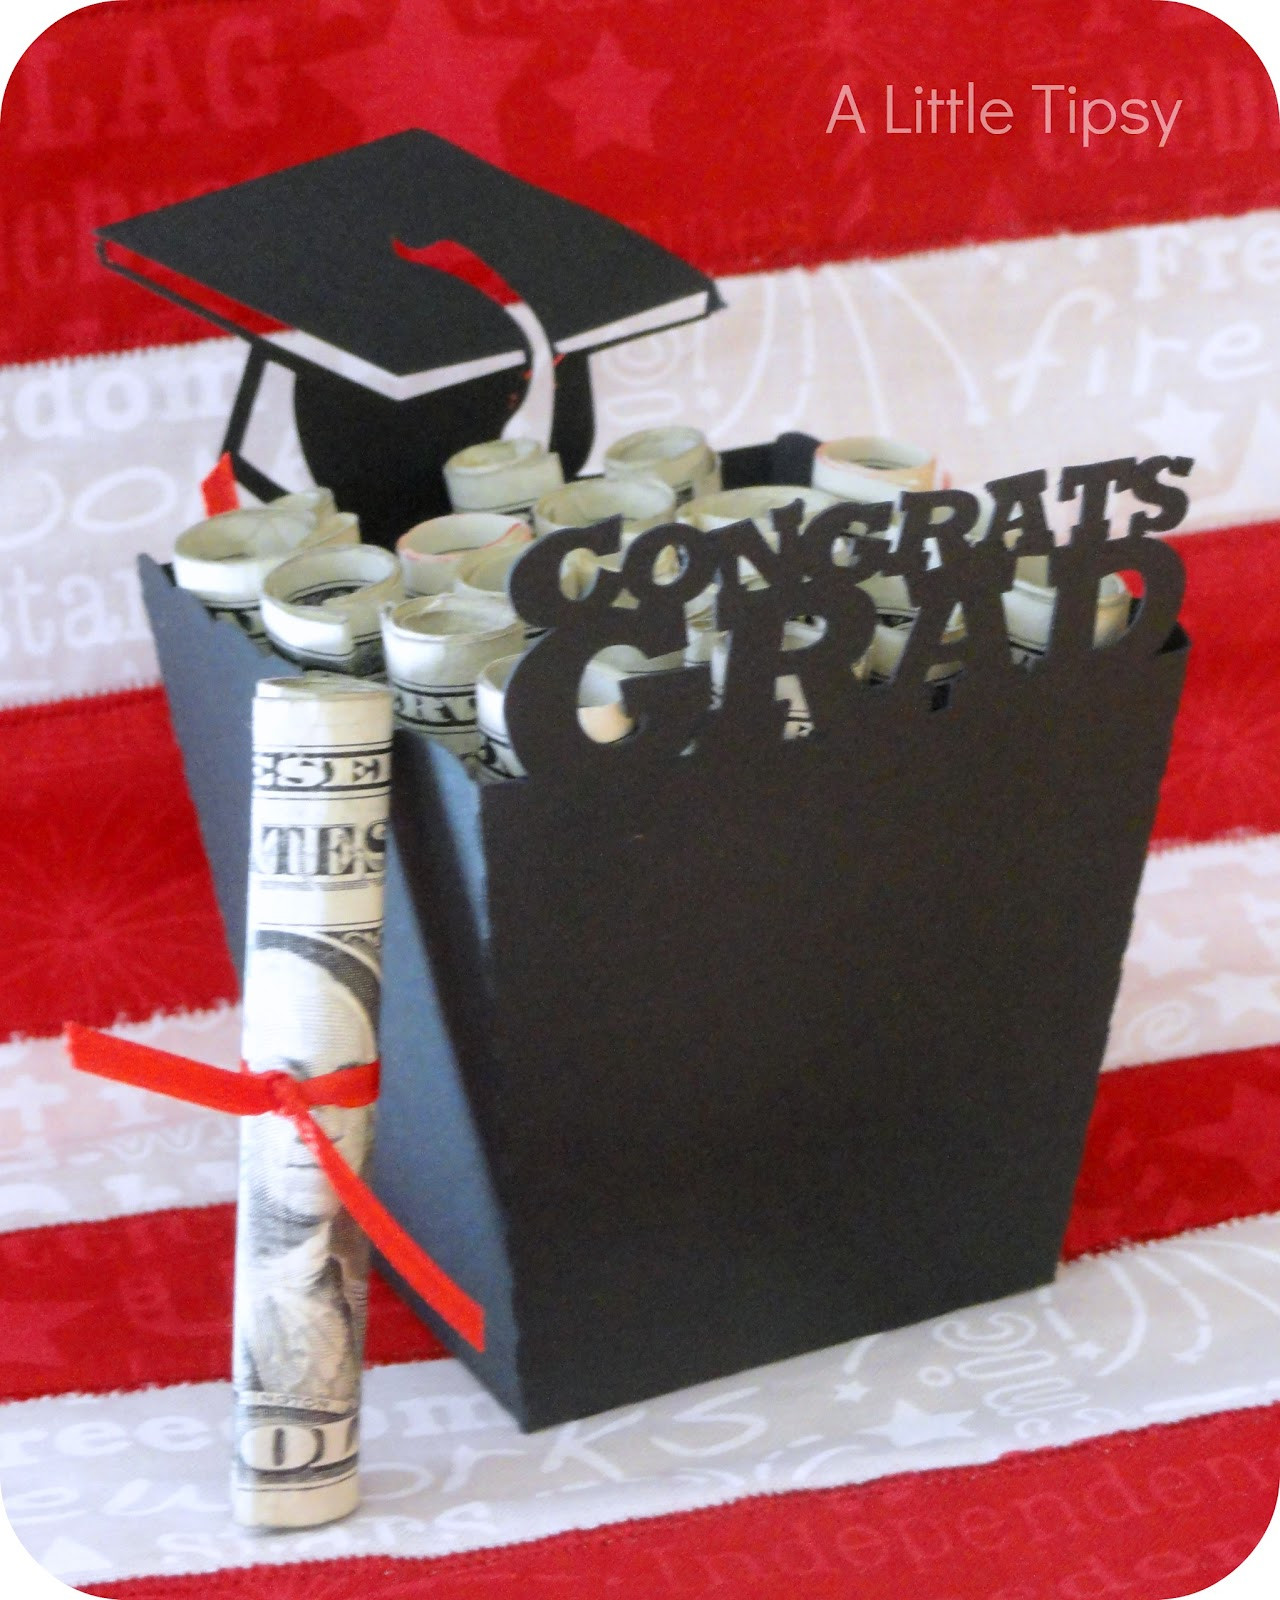 High School Graduation Gift Ideas For Her
 Last Minute Graduation Gift A Little Tipsy